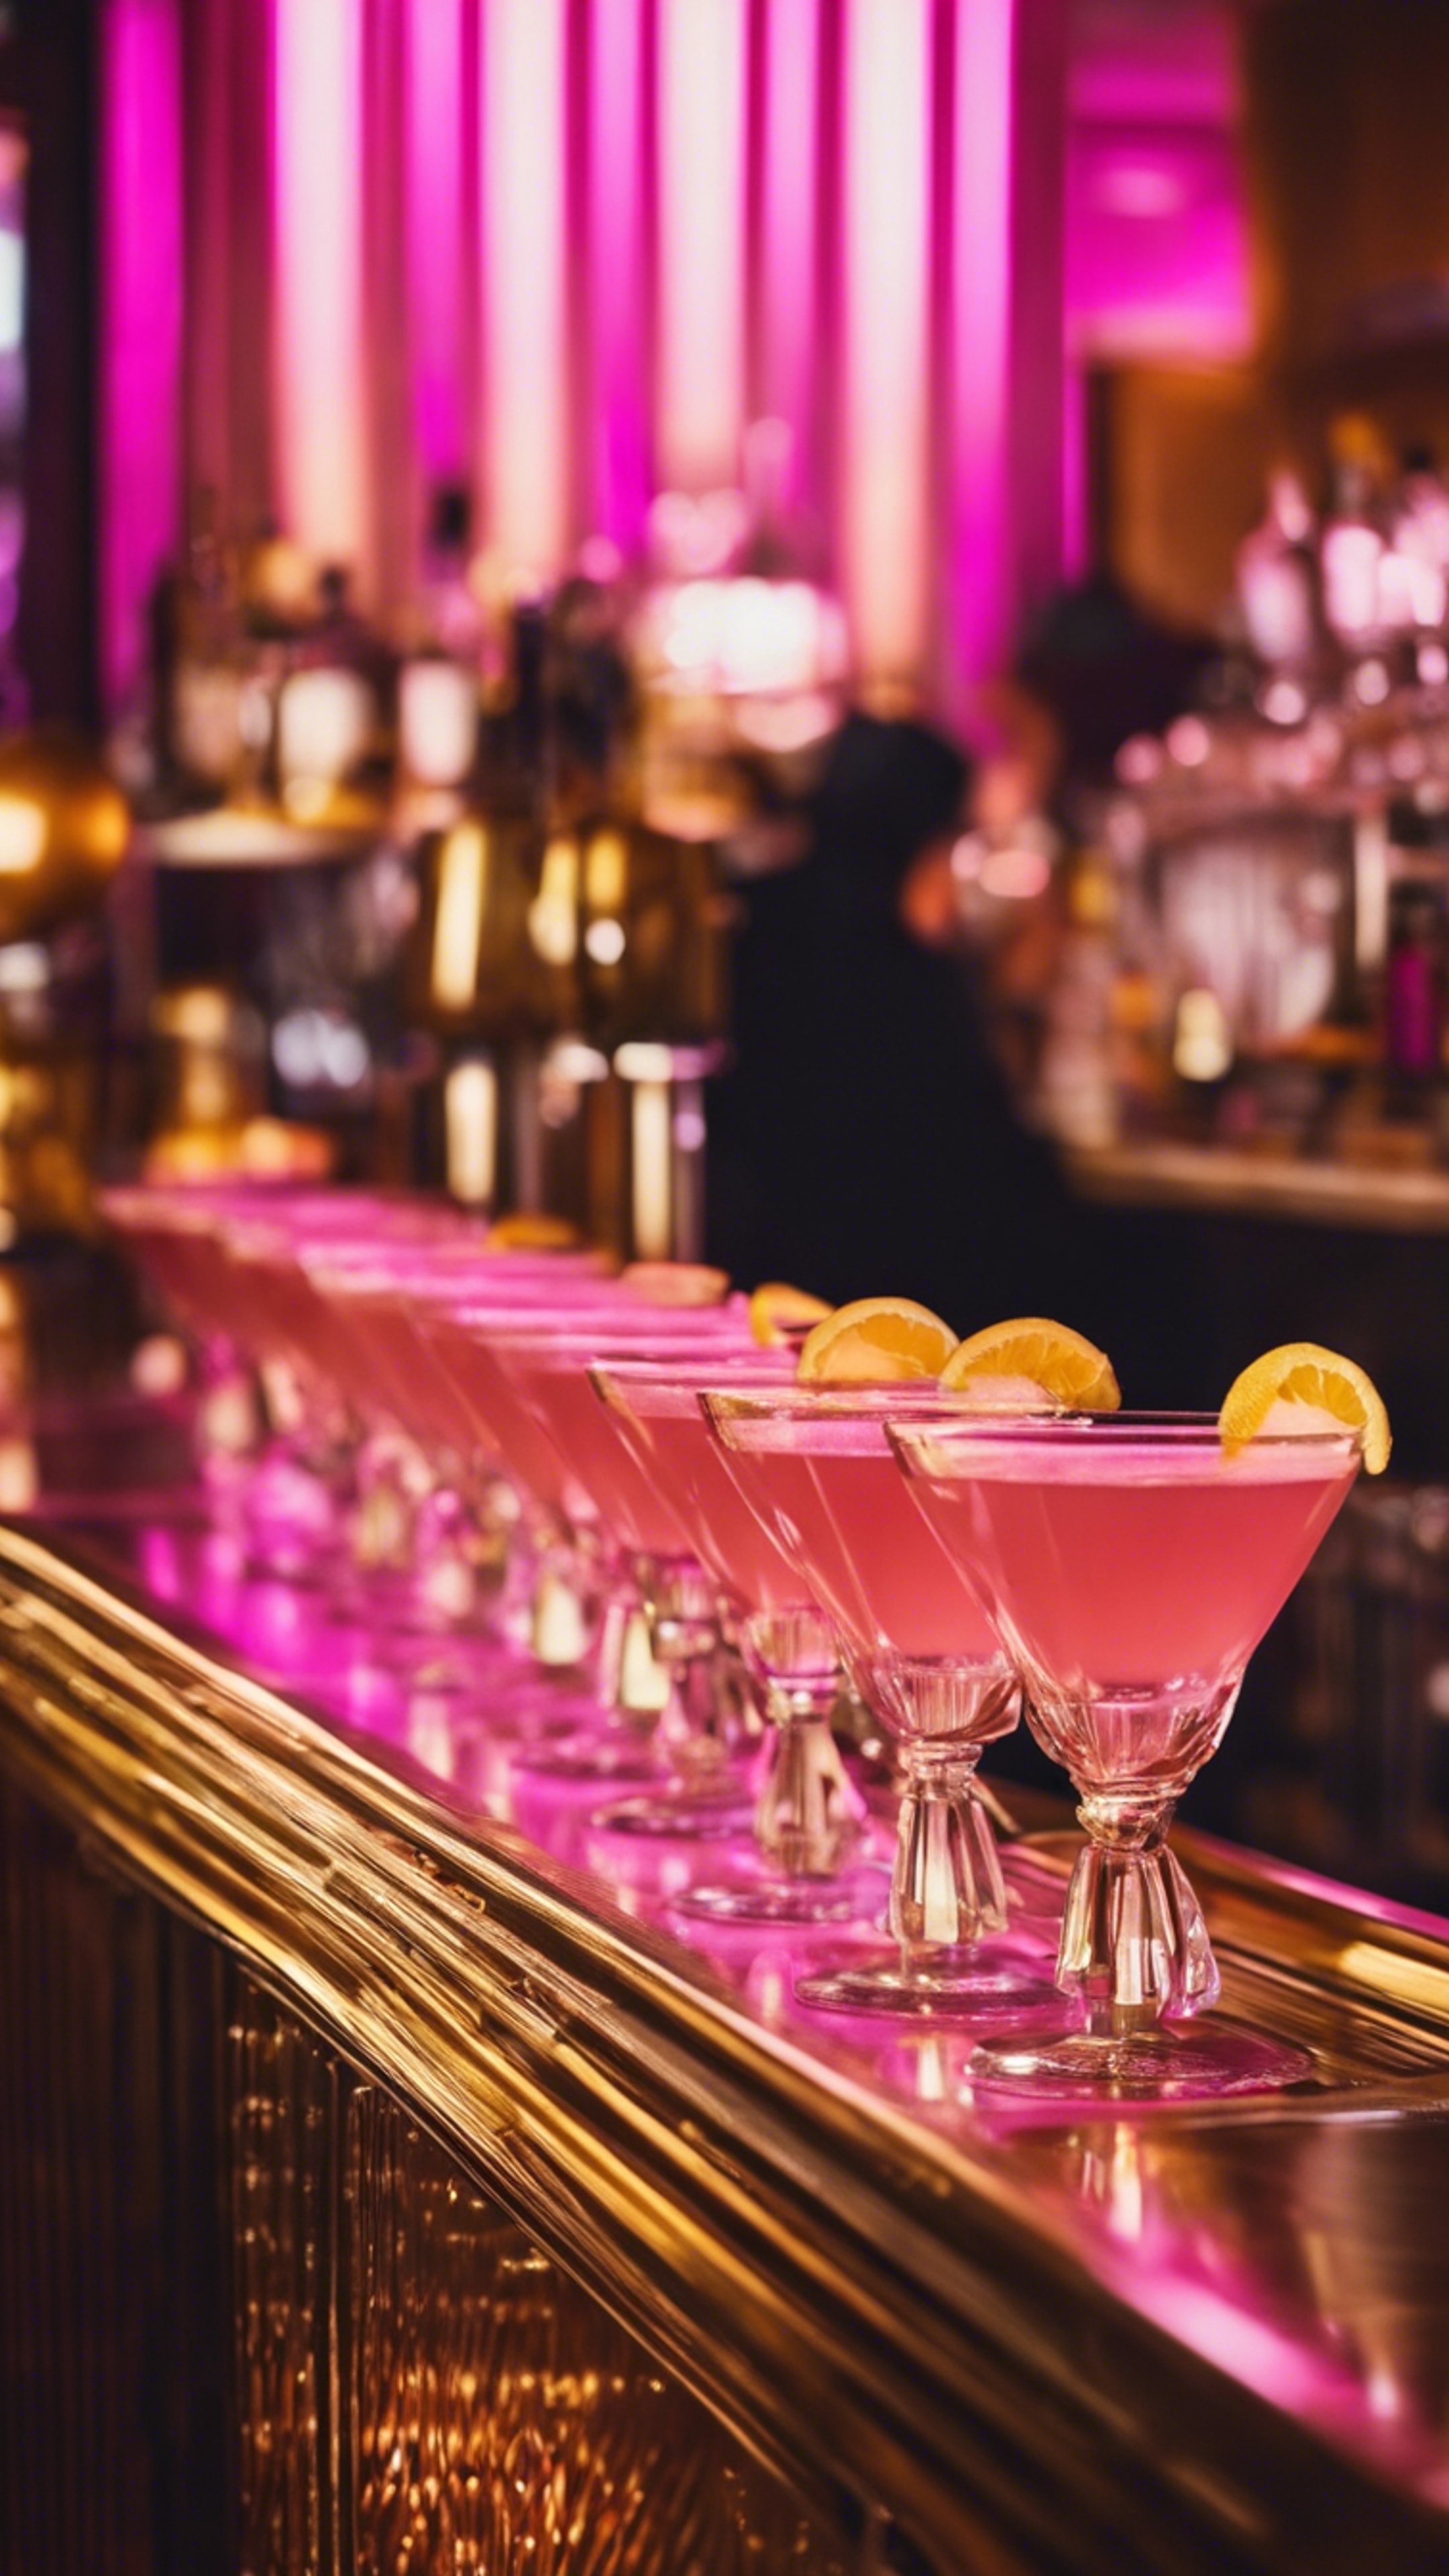 An art deco style pink and gold cocktail bar, bustling with glamour and elegance. 墙纸[0d4a66f95ef04aa3ad16]